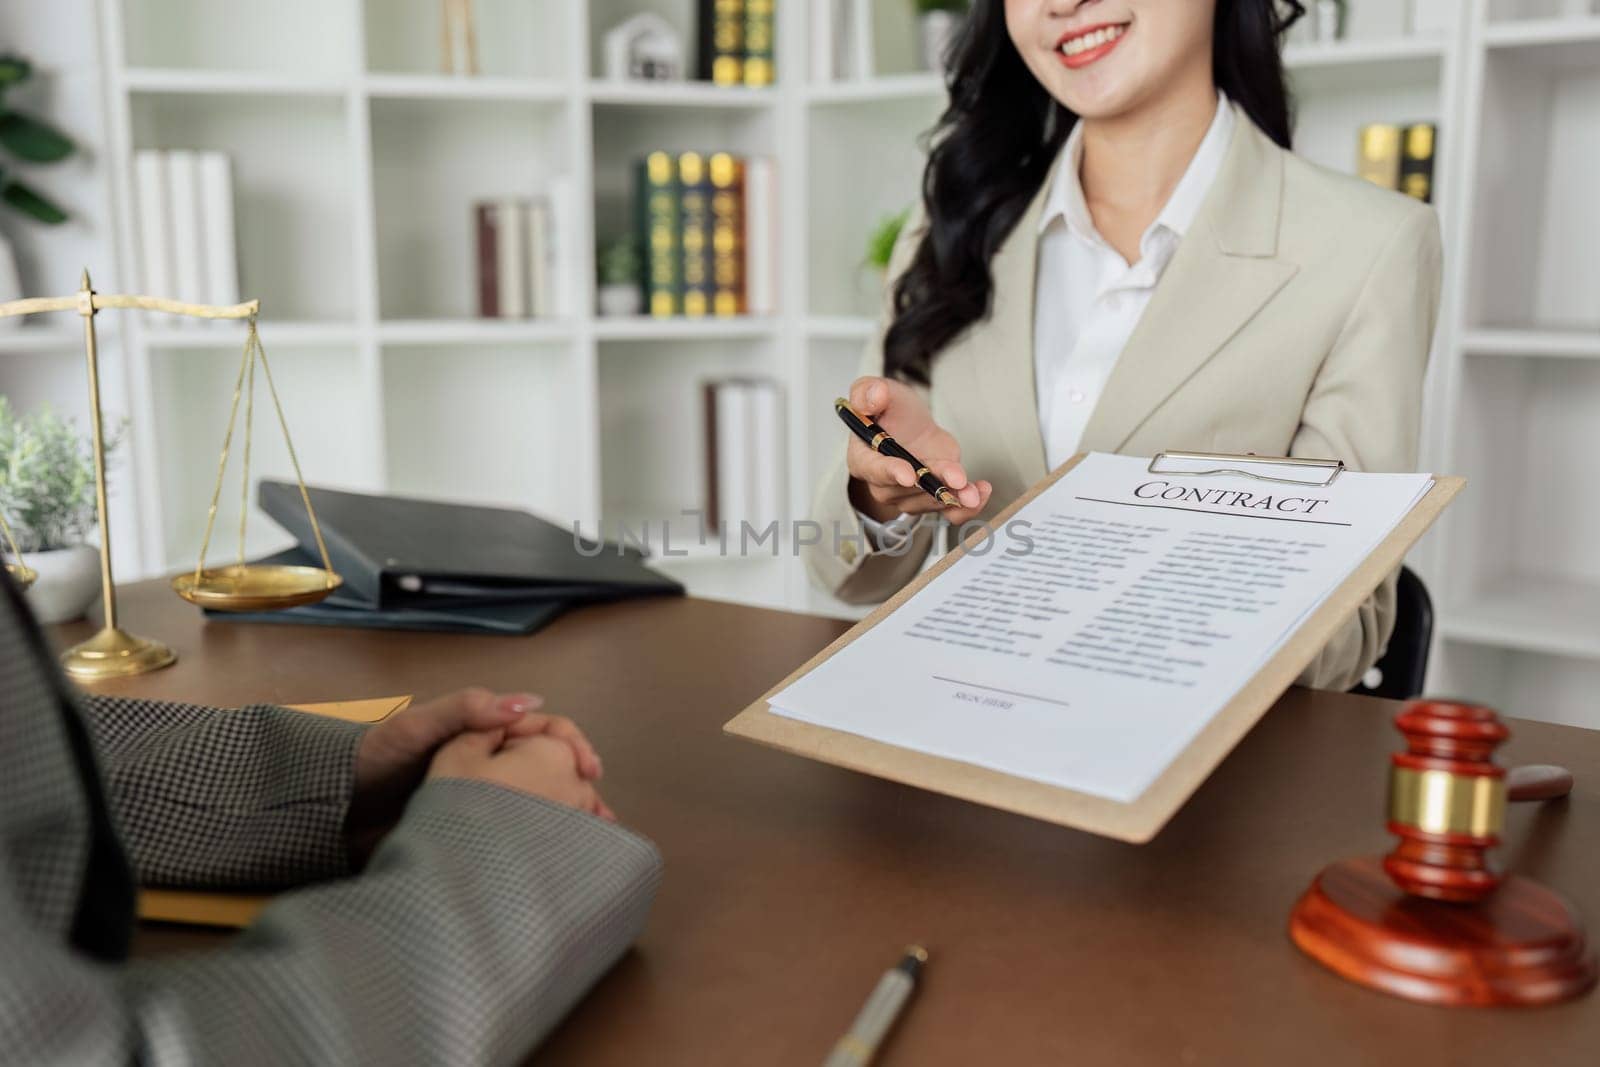 Lawyers provide advice to client are business partner. Lawyer working with client discussing contract document in office, consulting to help customer by itchaznong